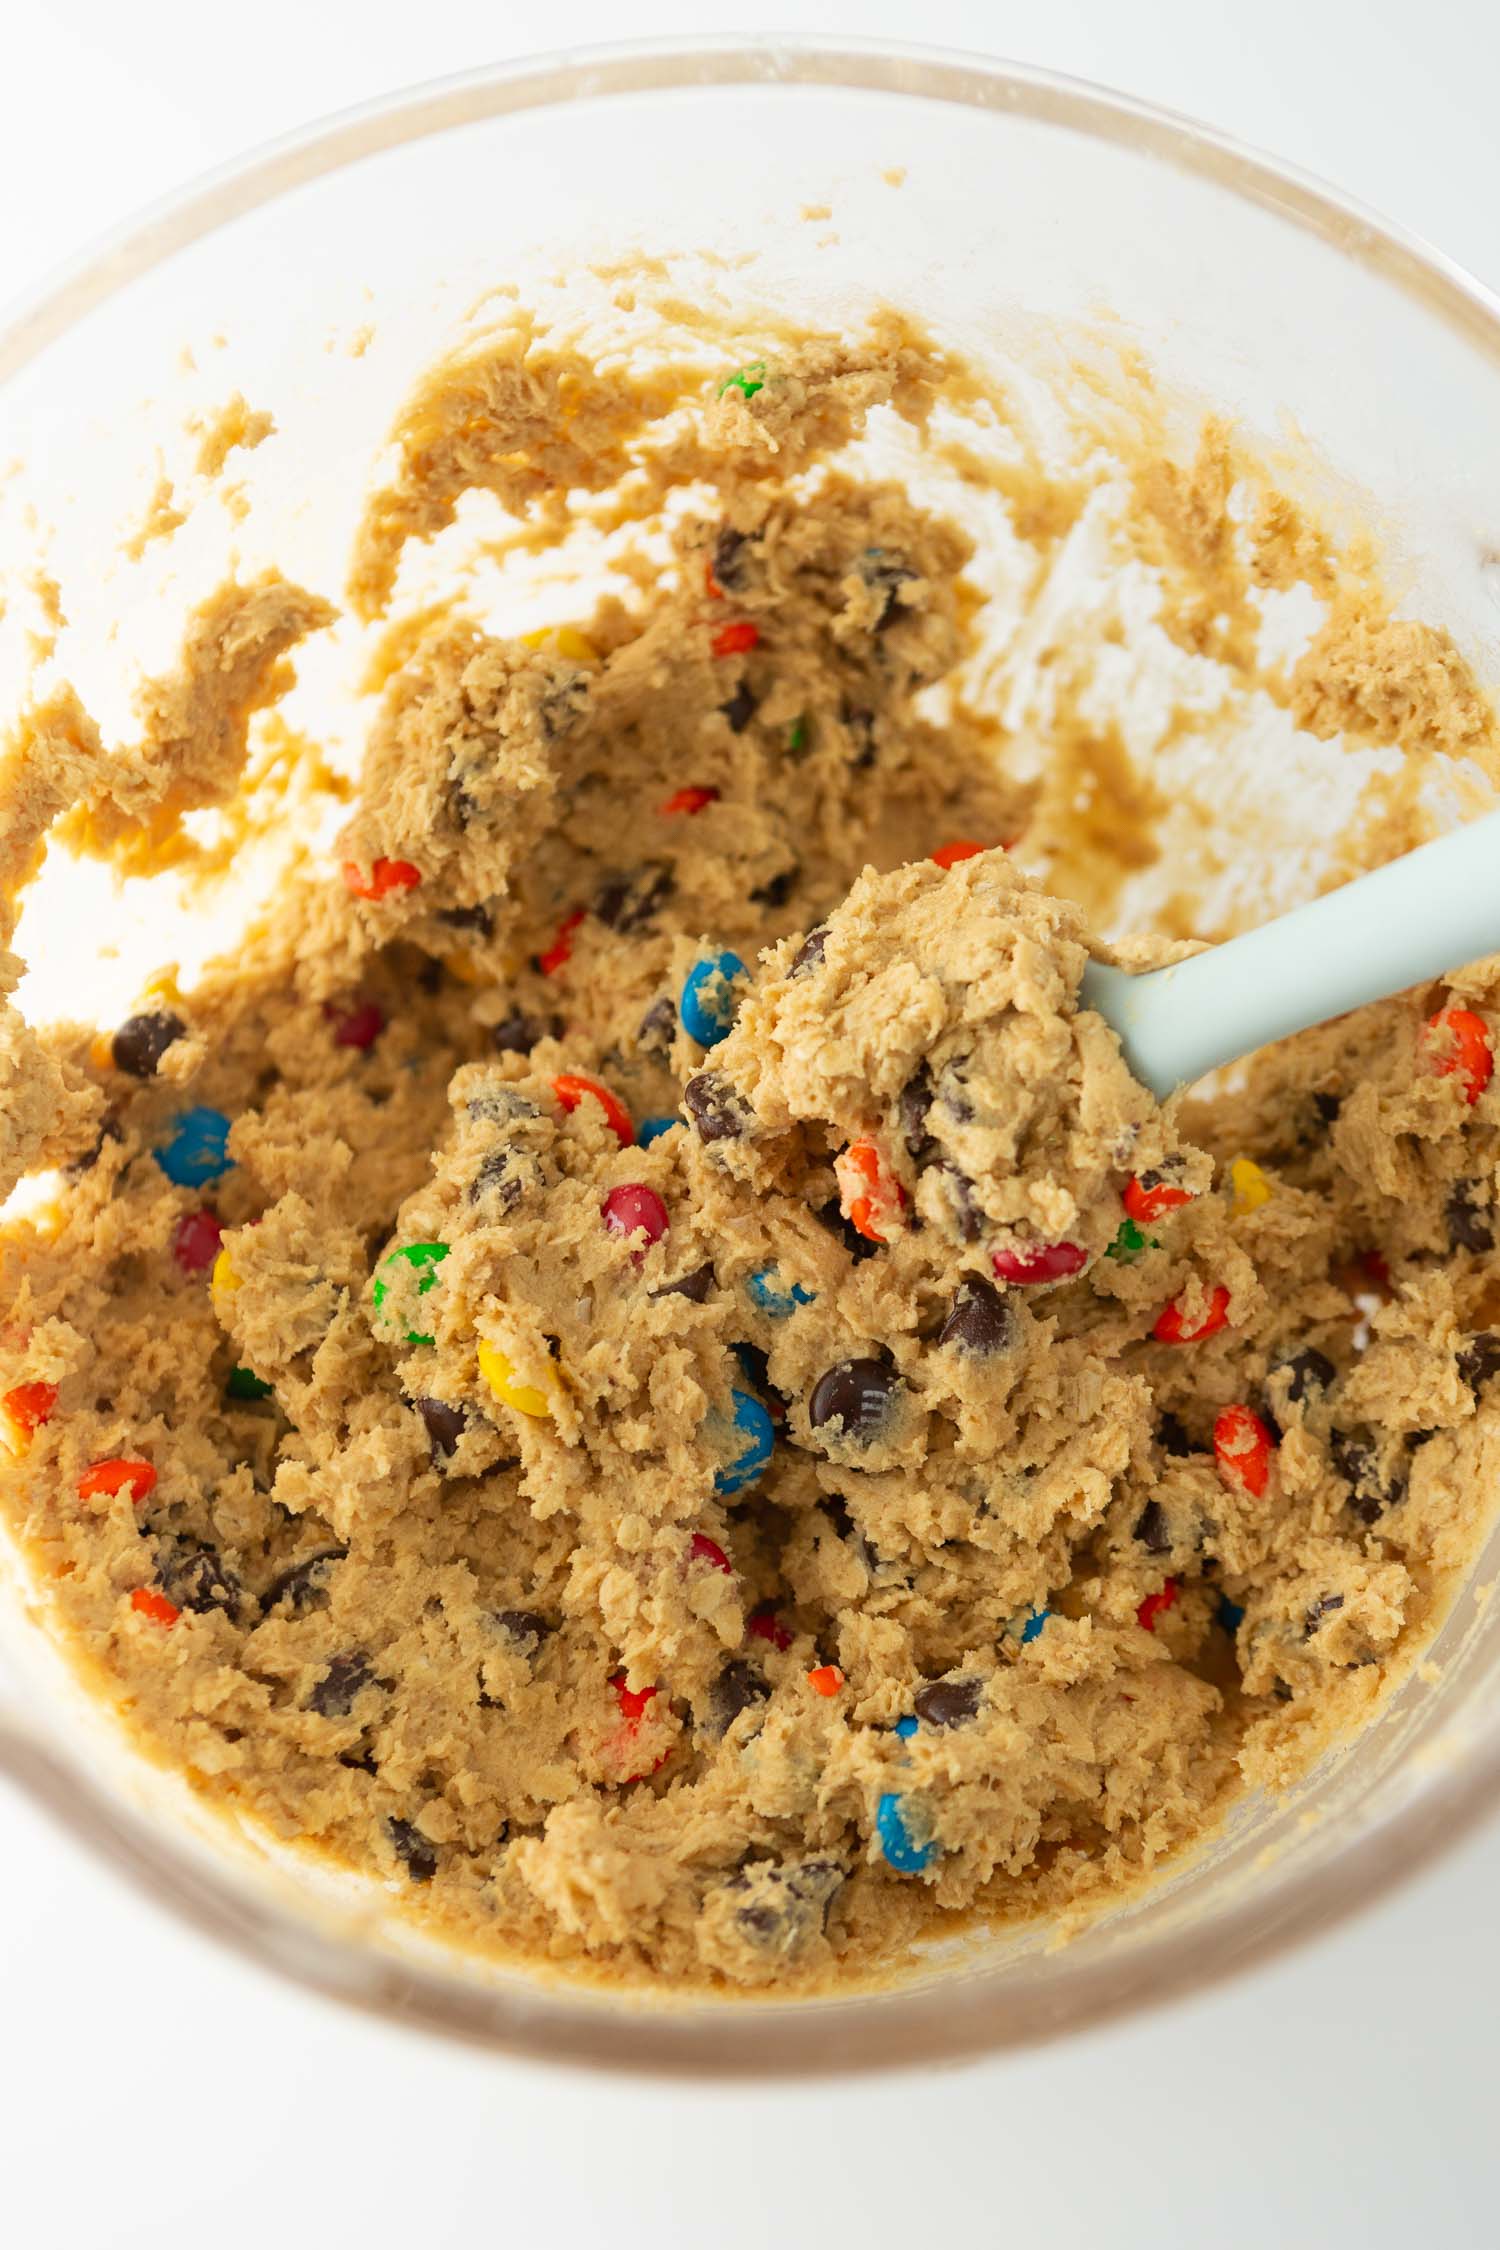 bowl of monster cookie dough with chocolate chips and m&m's